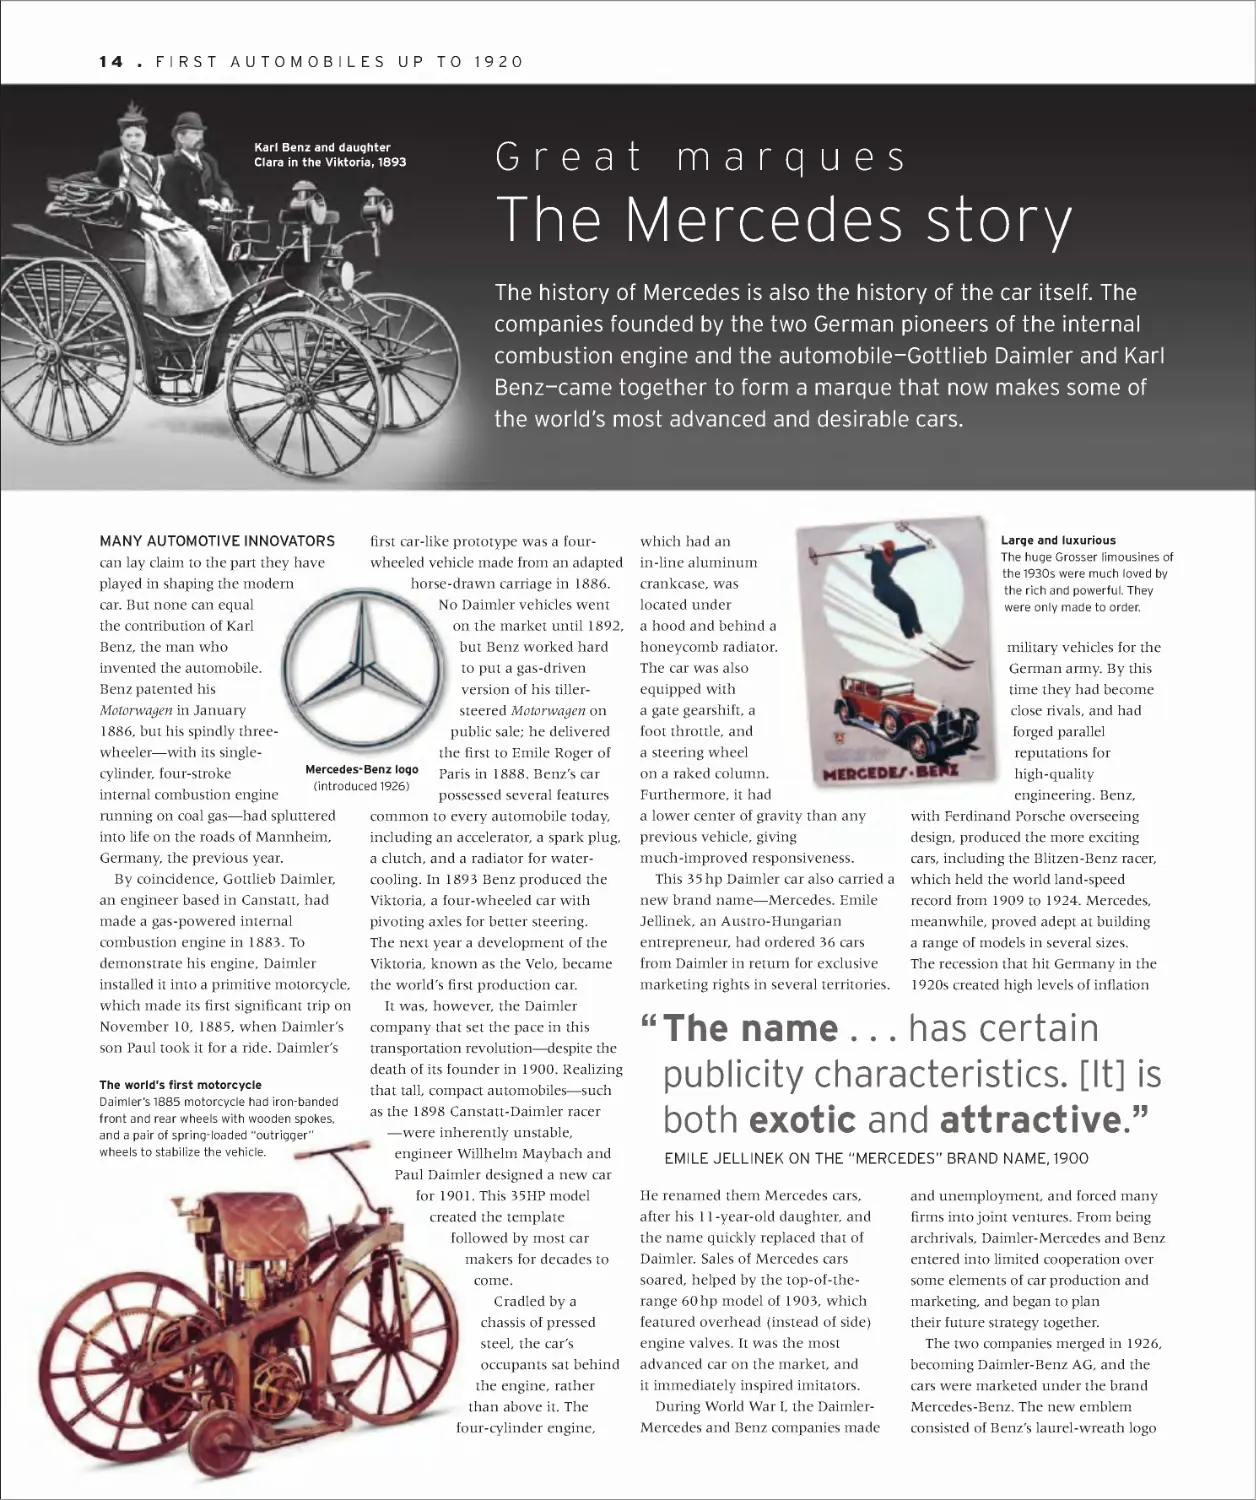 Great marques: The Mercedes story 14